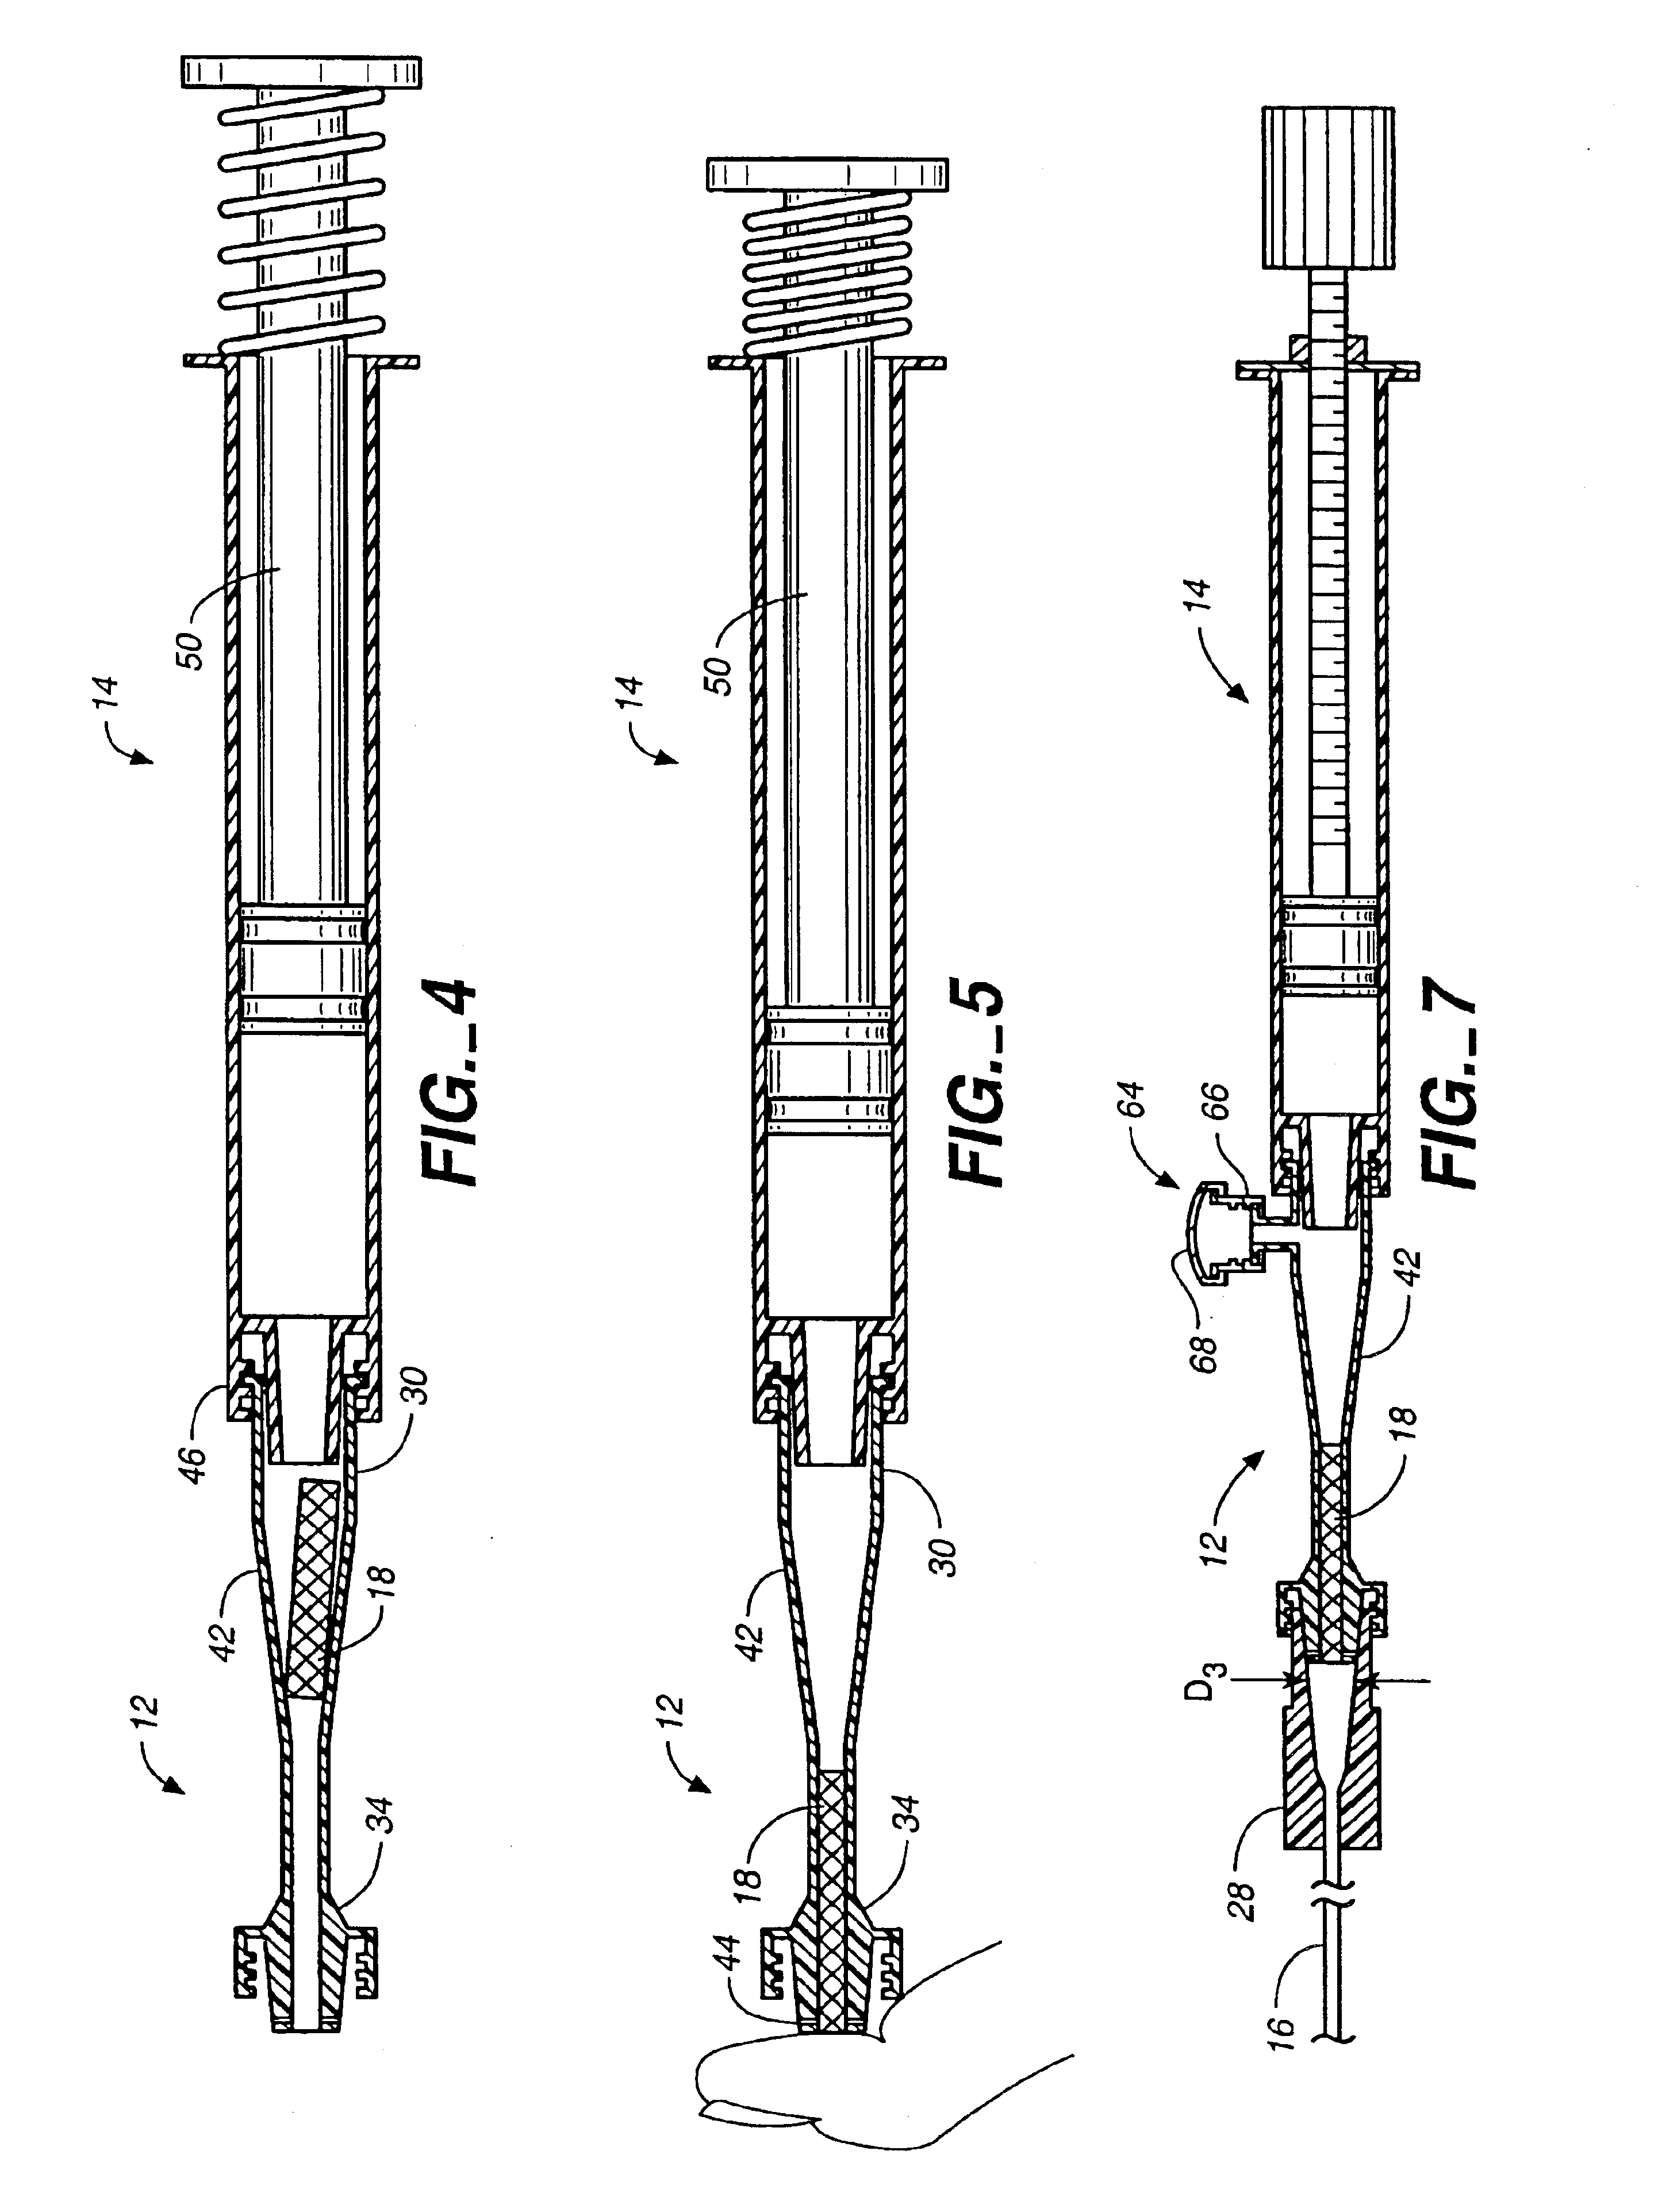 Device and method for facilitating hemostasis of a biopsy tract